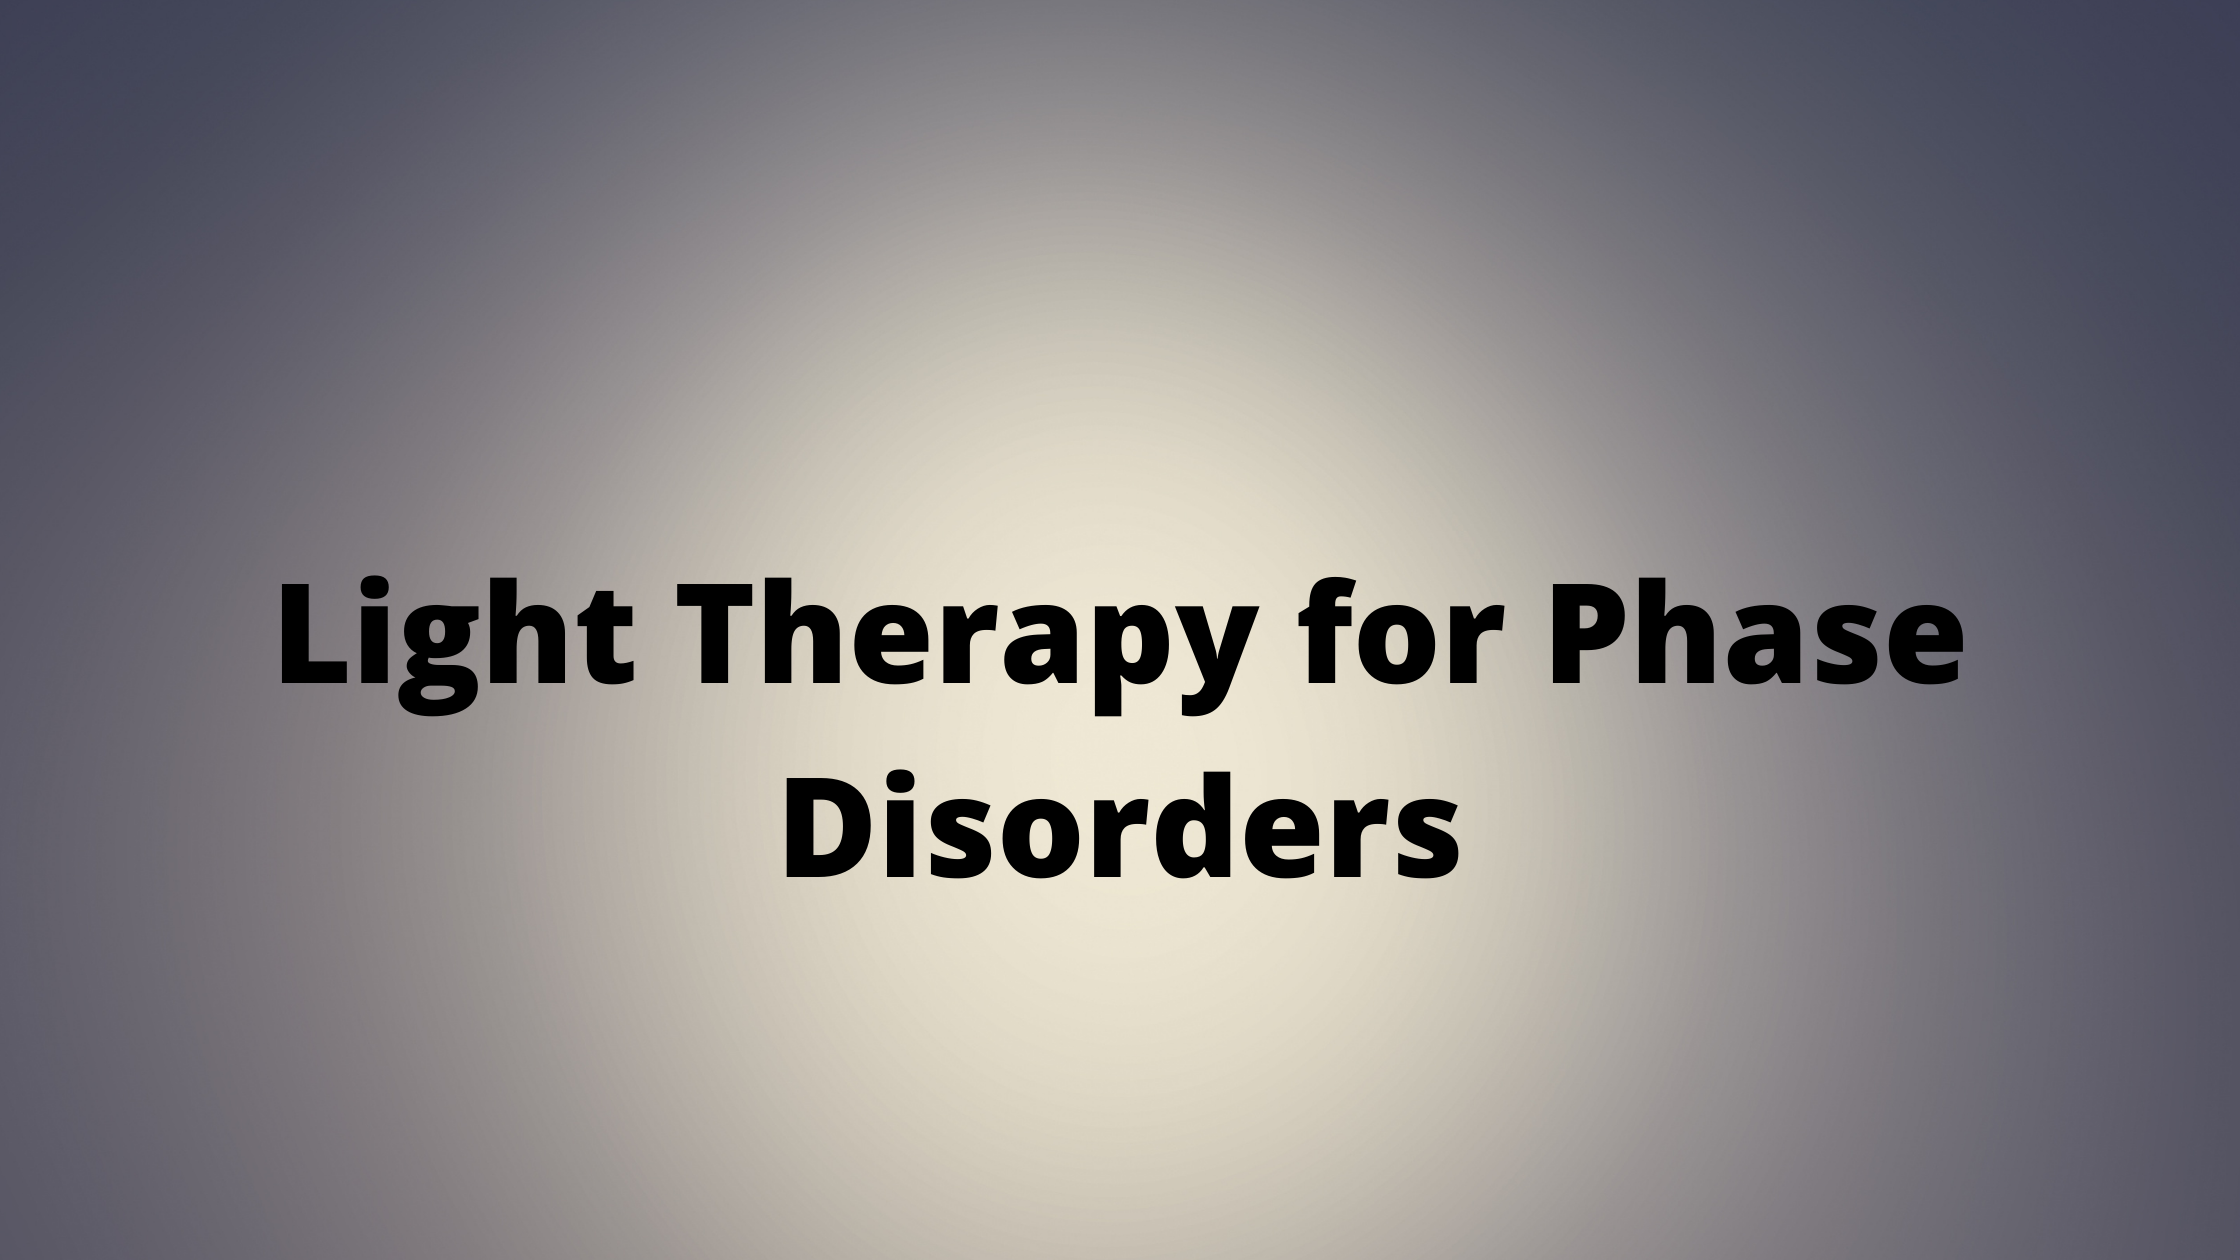 Light Therapy for Phase Disorders